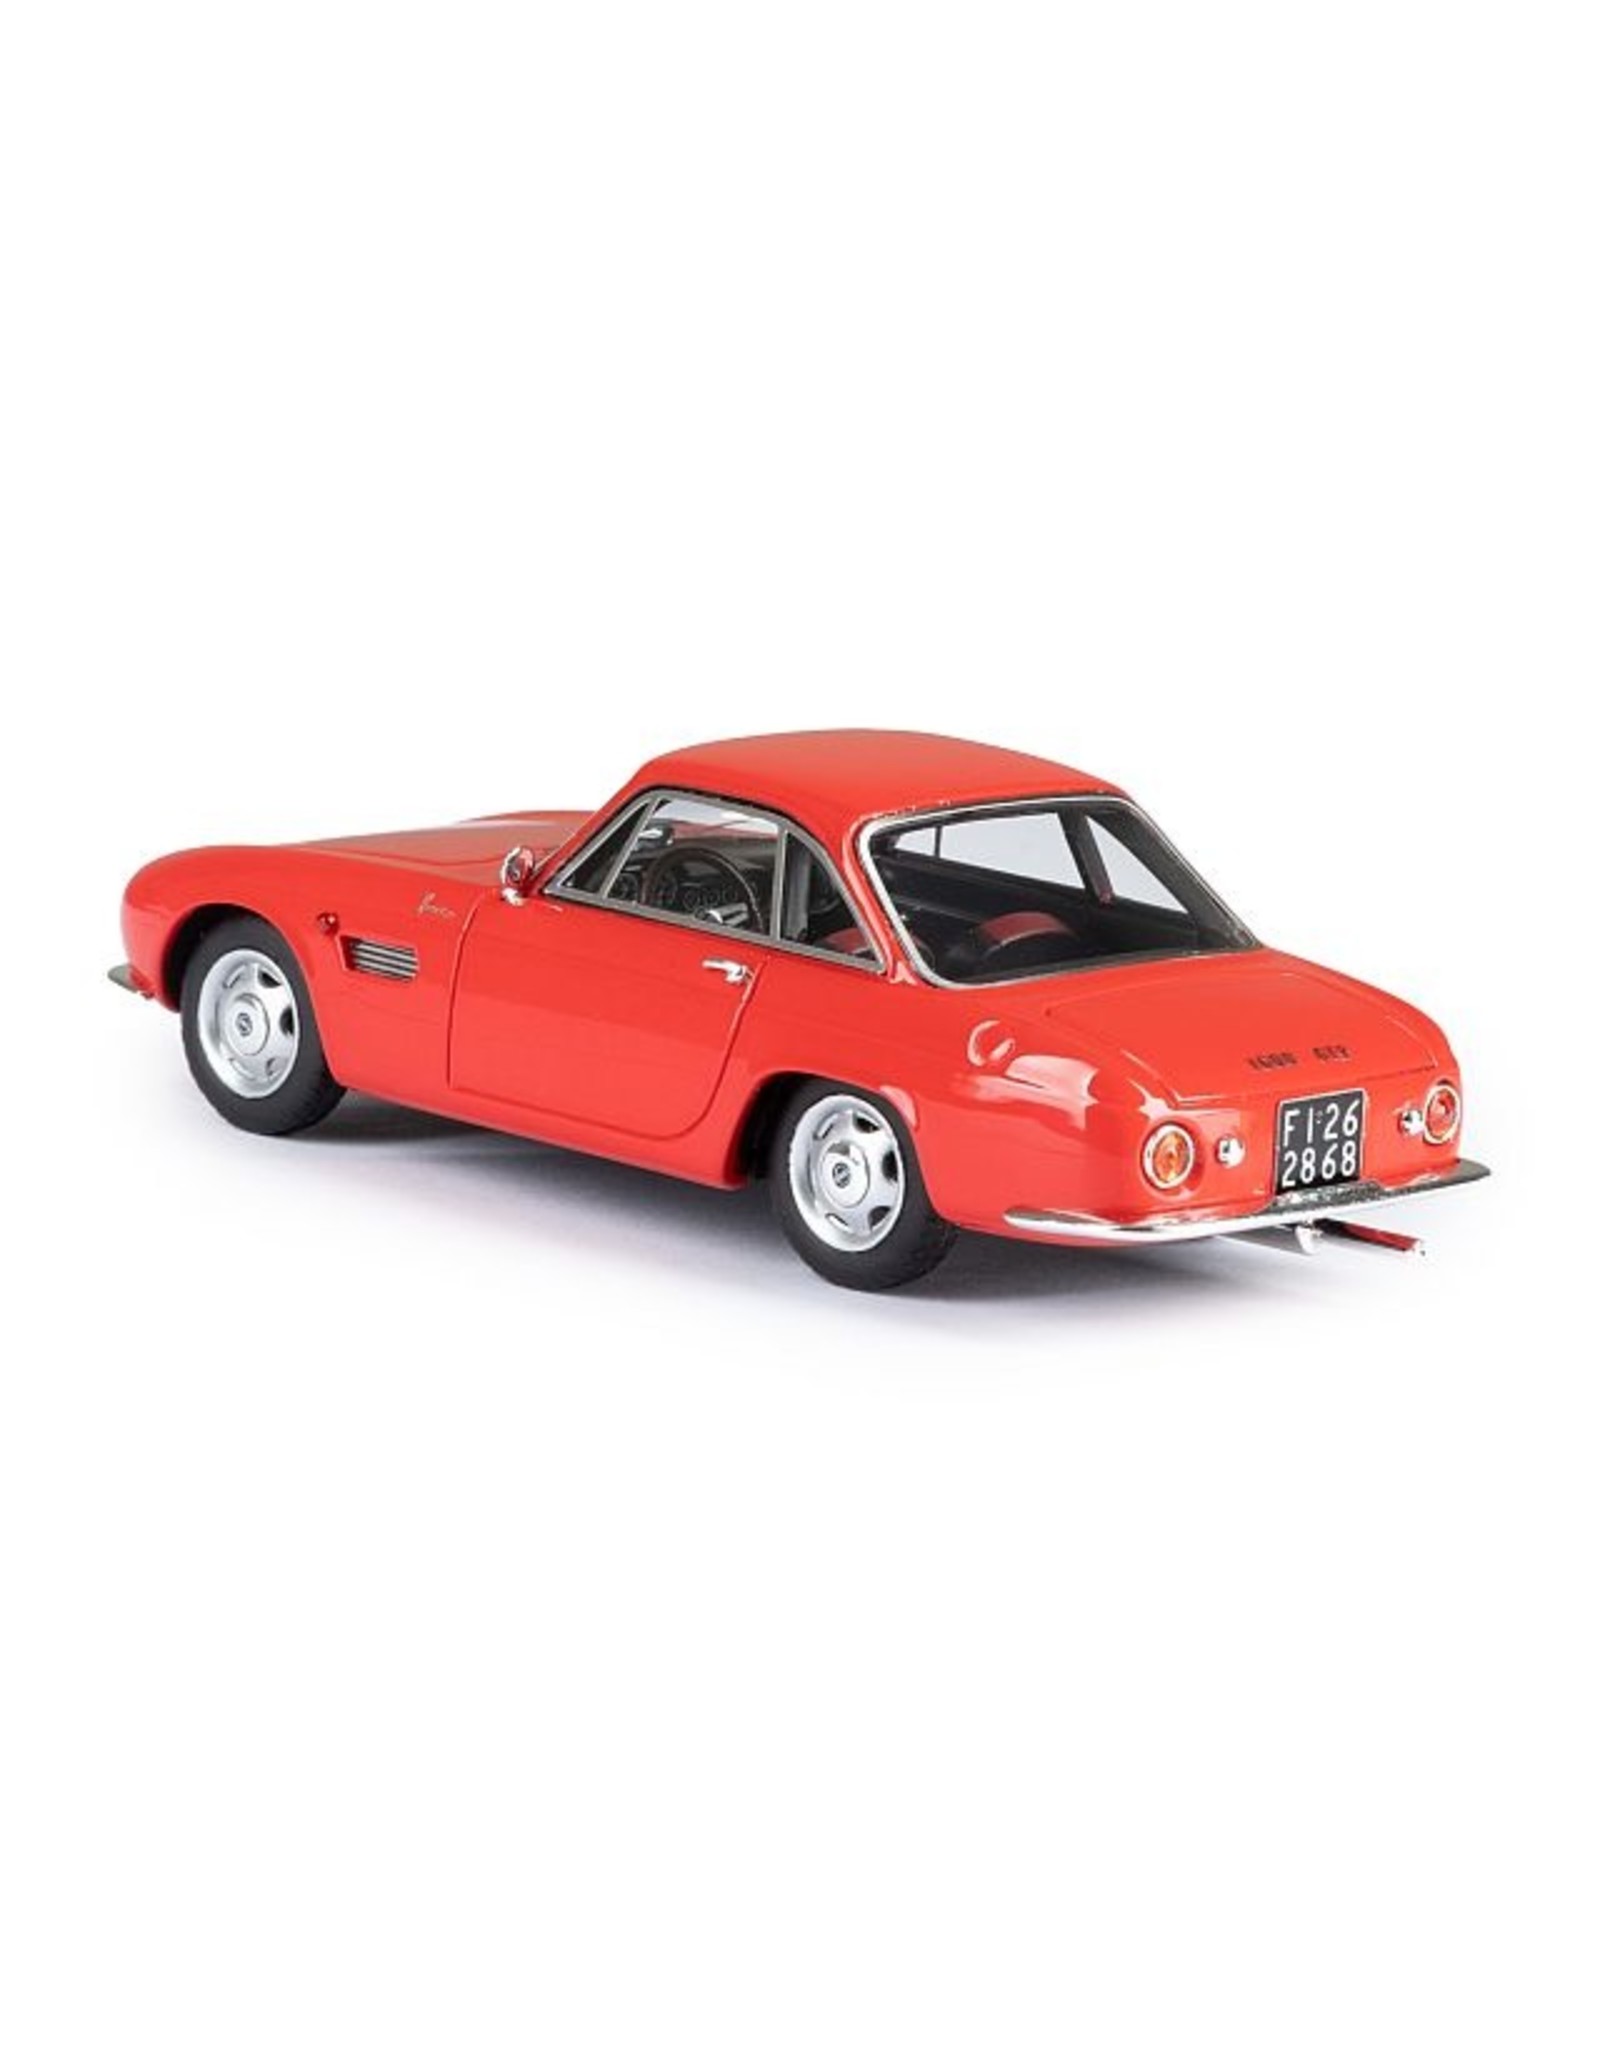 OSCA BY FISSORE Osca 1600 GT coupe by Fissore(1963)red